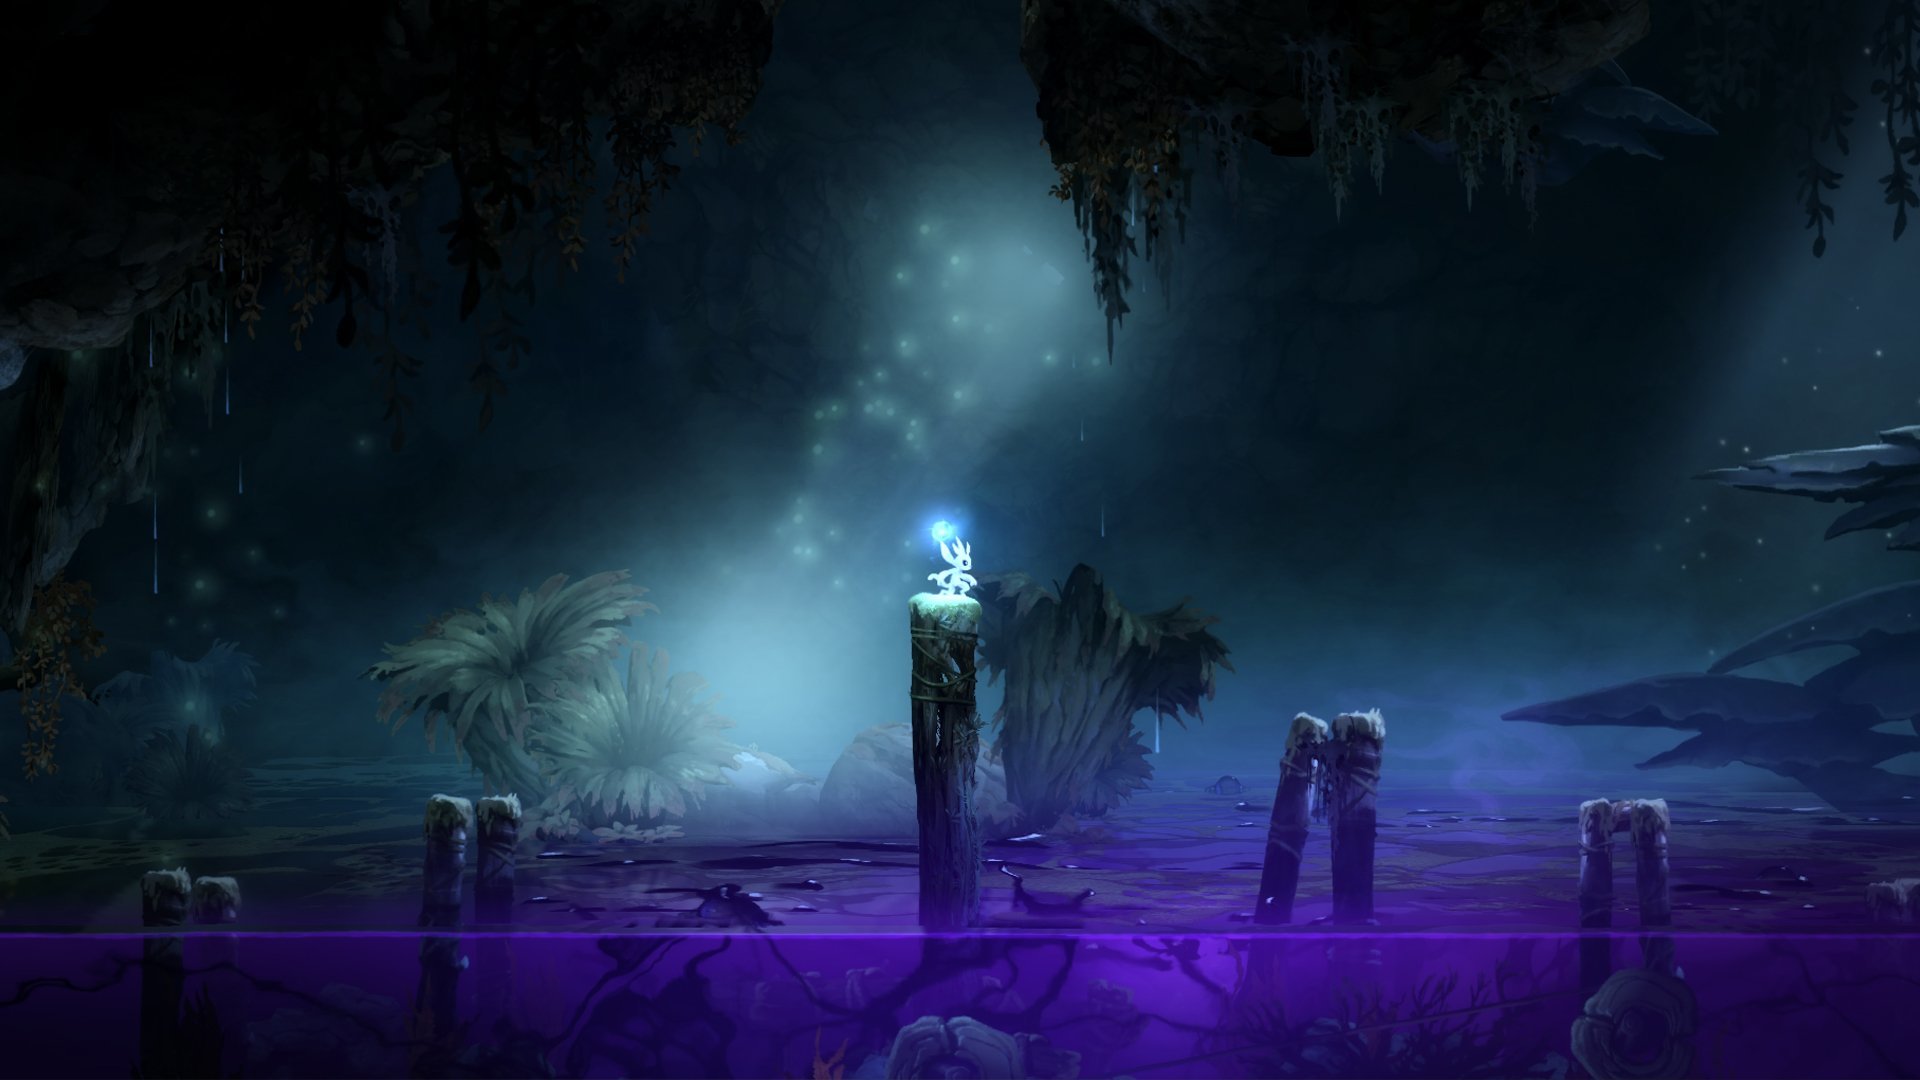 Best Ori And The Blind Forest wallpaper ID:324350 for High Resolution full hd 1920x1080 desktop